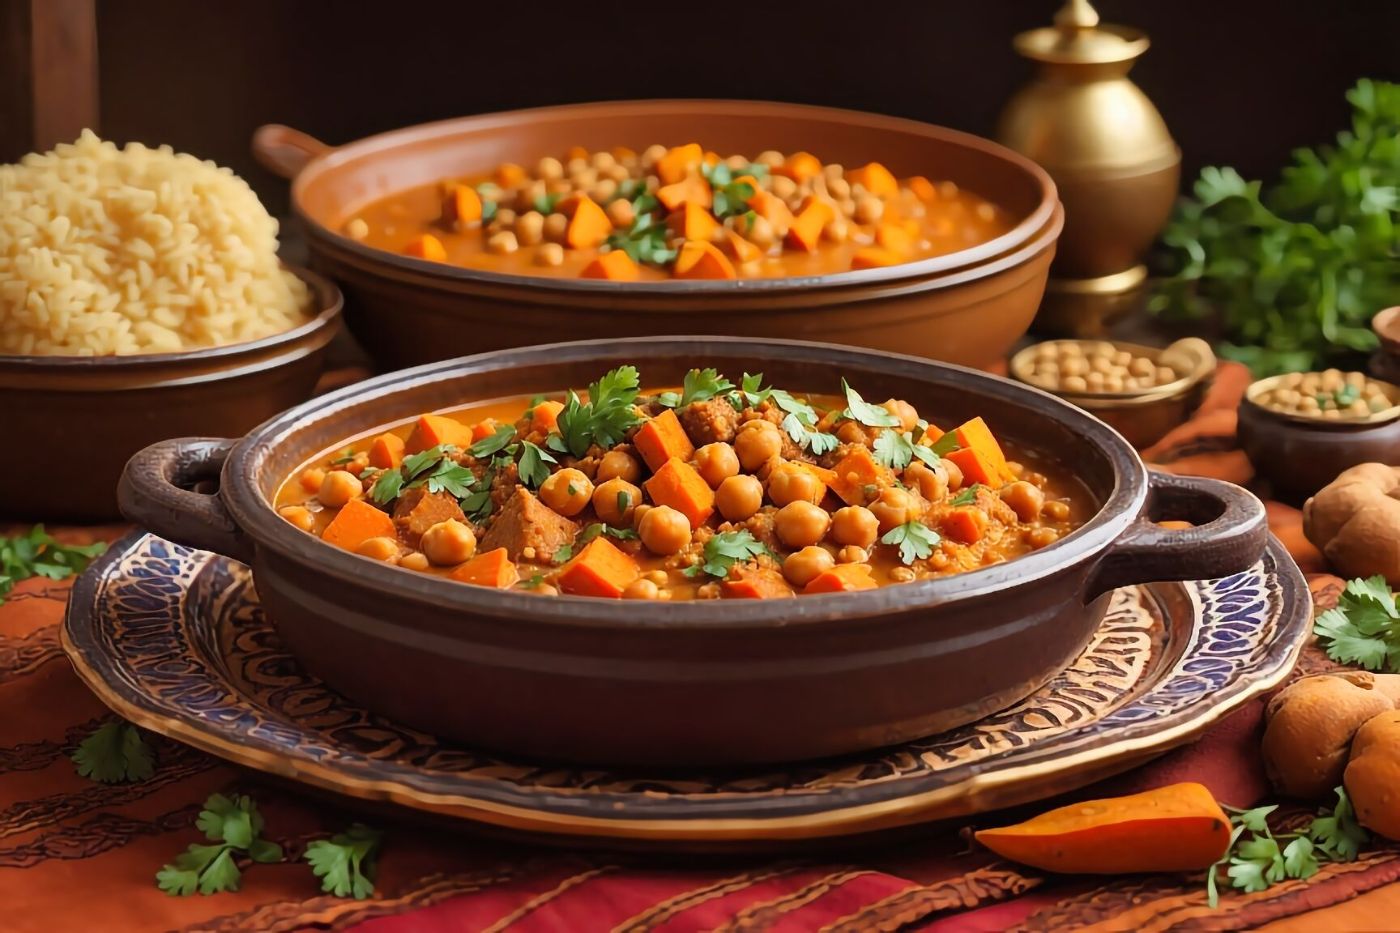 Moroccan Stew with Chickpeas and Sweet Potatoes Recipe